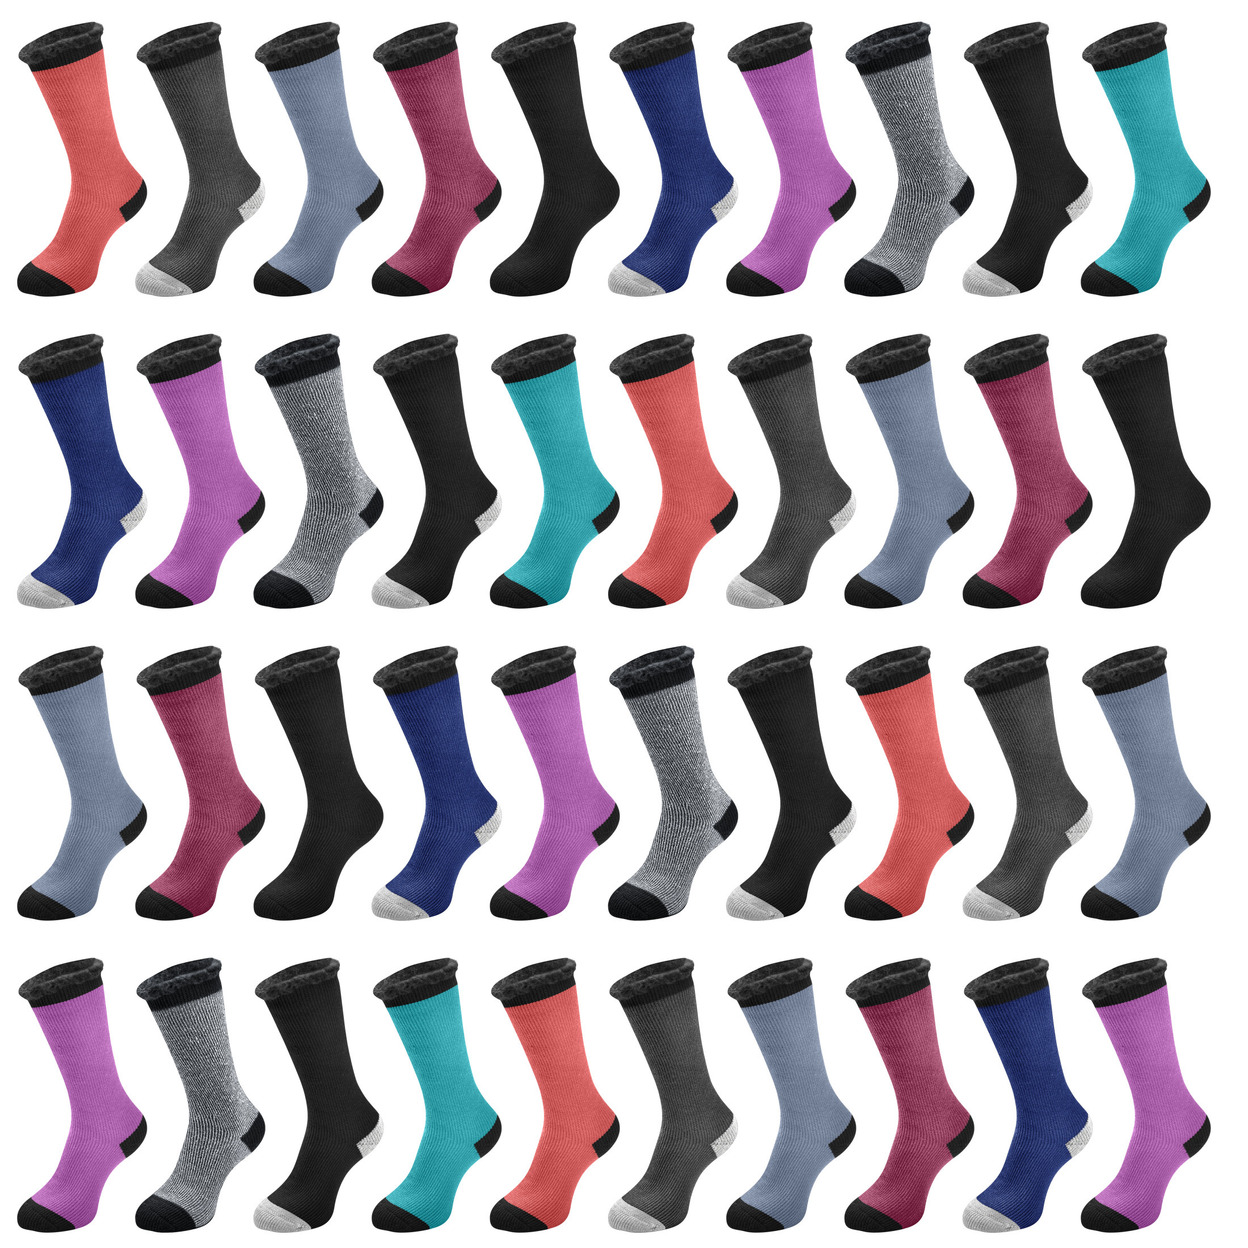 2-Pairs: Men's Thermal-Insulated Brushed Lined Warm Heated Winter Socks For Cold Weather